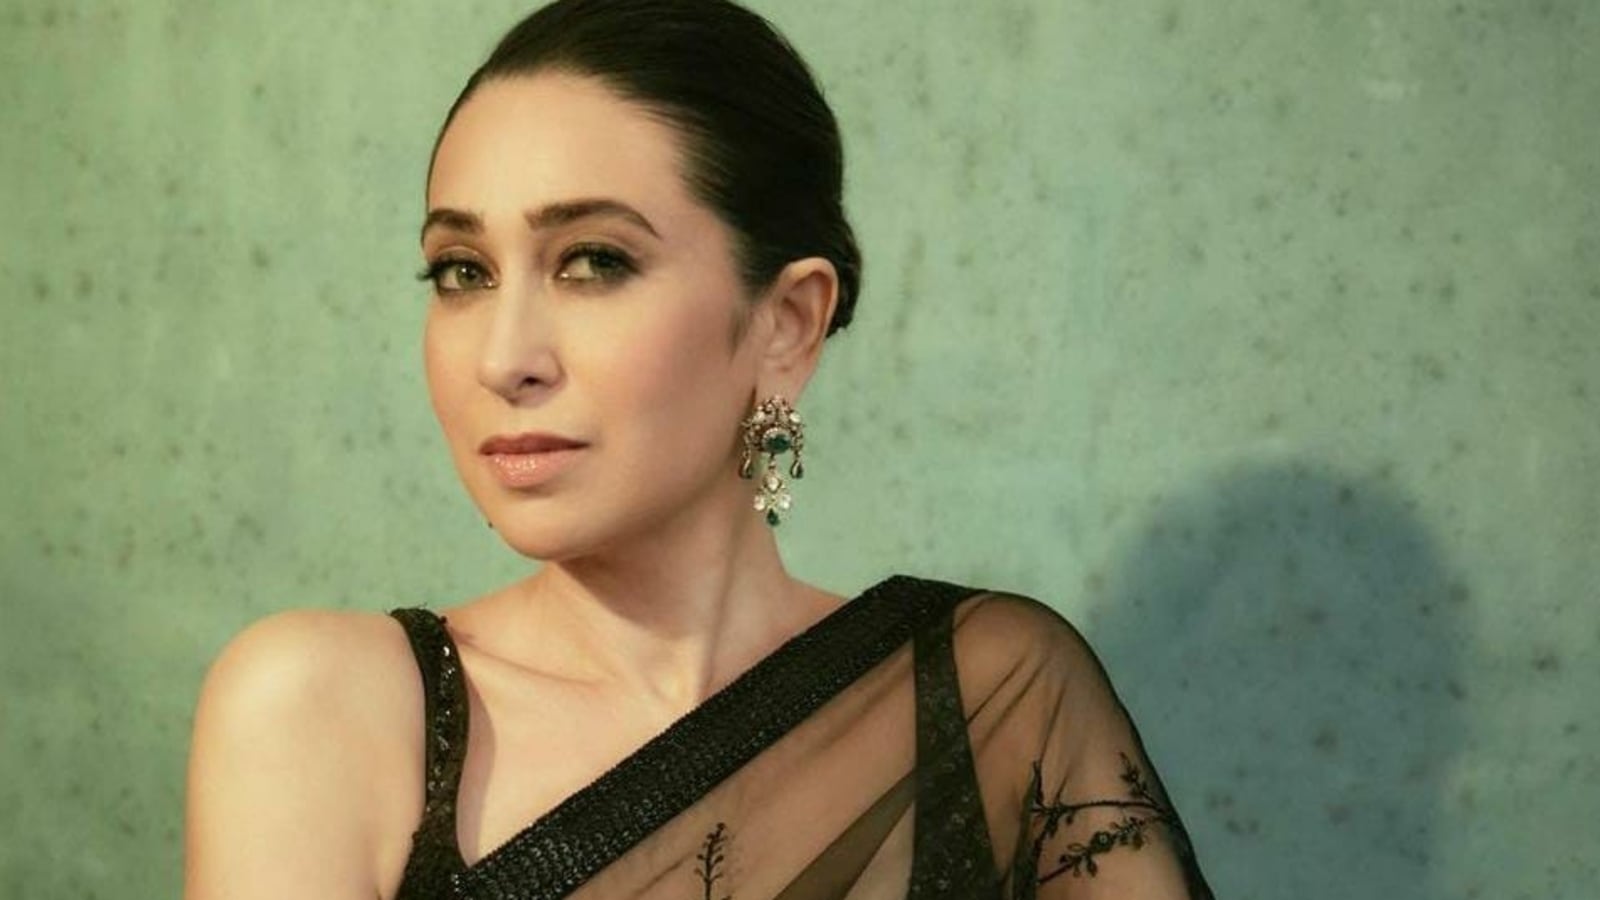 Karinakapur Xxx - Karisma Kapoor responds as fan asks her if she would ever get married again  | Bollywood - Hindustan Times